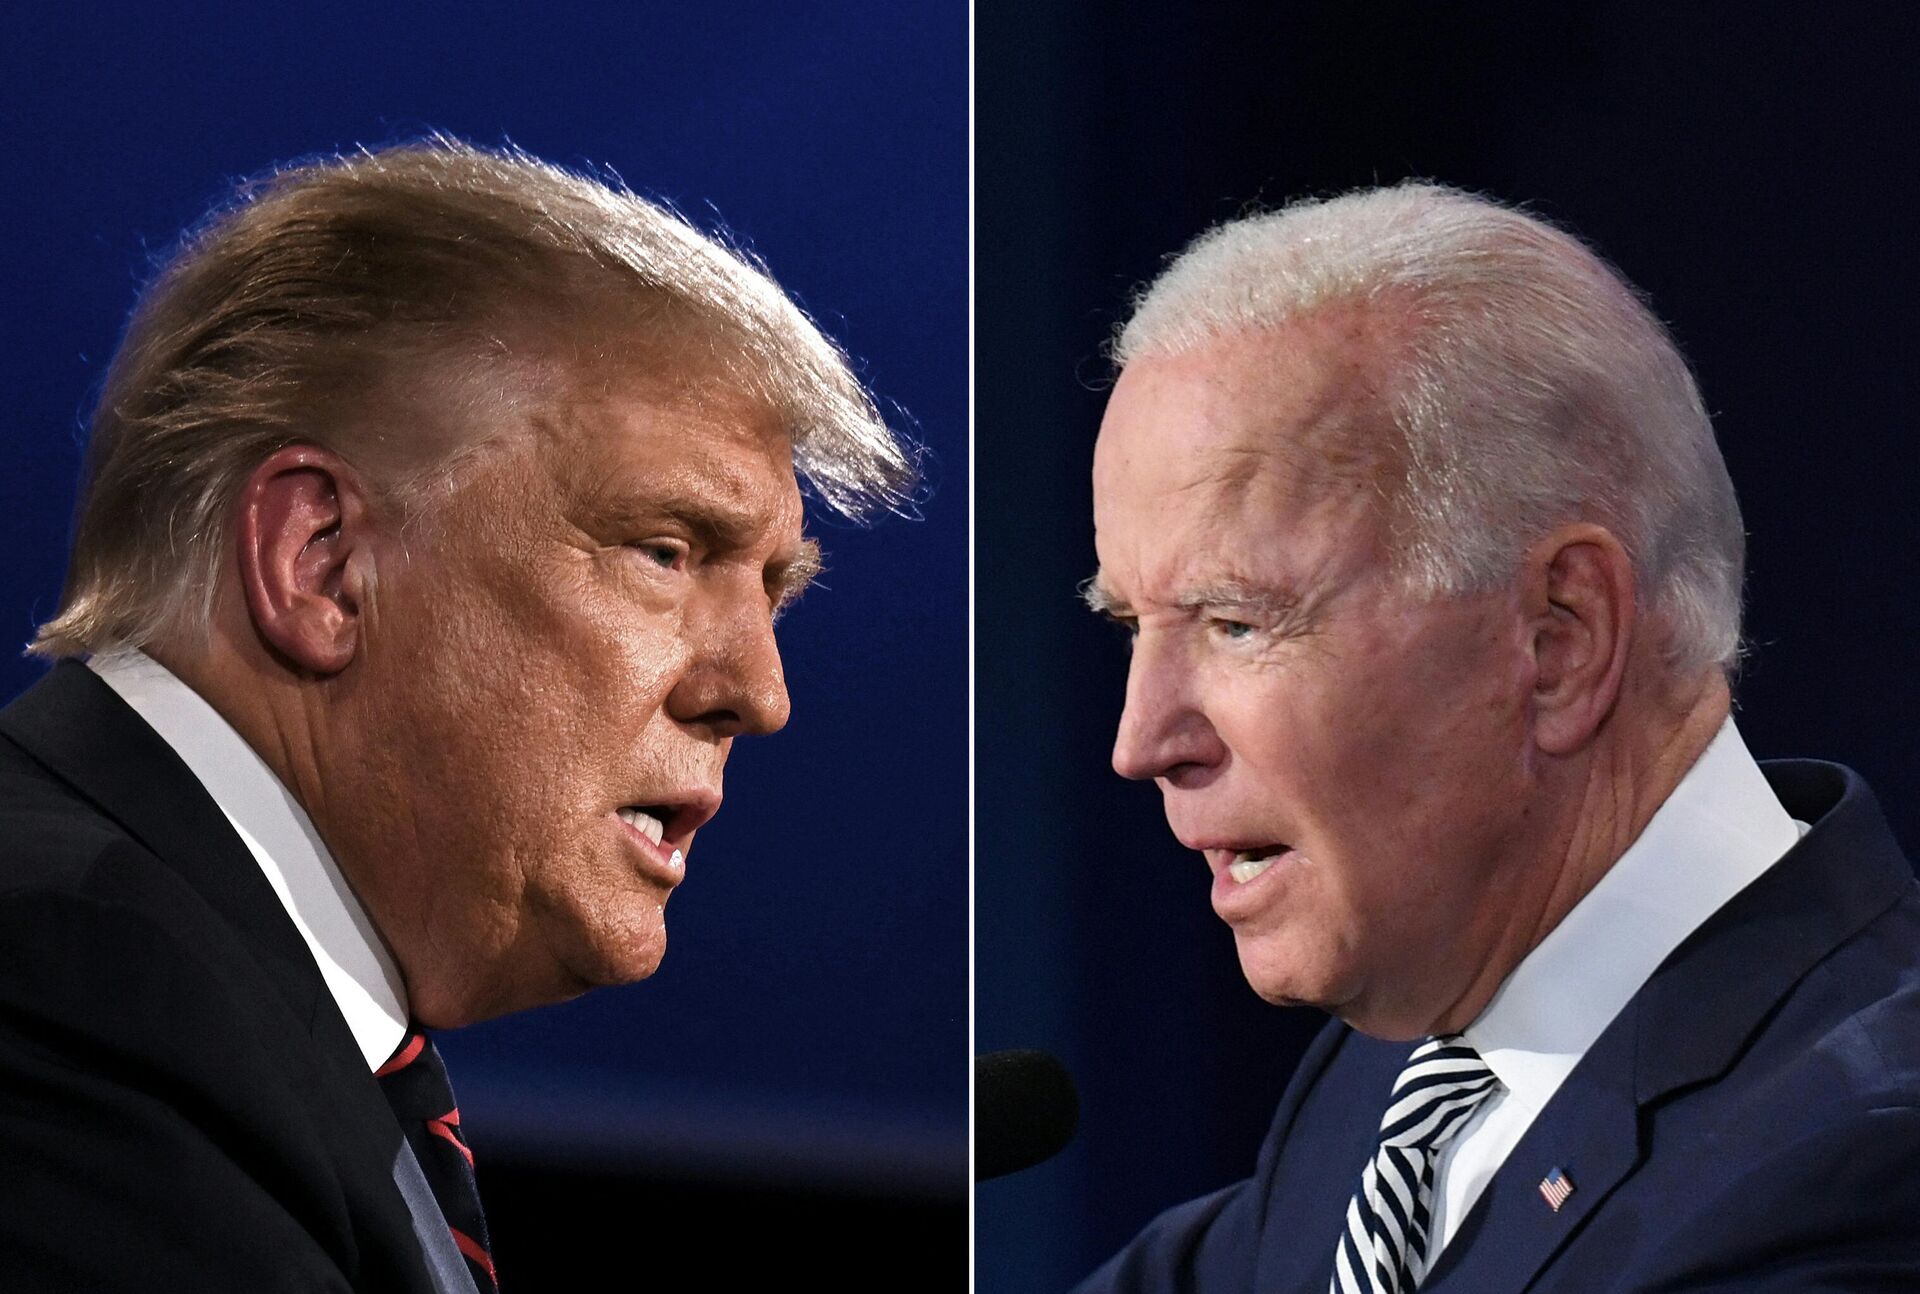 This combination of pictures created on September 29, 2020 shows US President Donald Trump (L) and Democratic Presidential candidate former Vice President Joe Biden squaring off during the first presidential debate at the Case Western Reserve University and Cleveland Clinic in Cleveland, Ohio on September 29, 2020. - Sputnik International, 1920, 26.12.2021